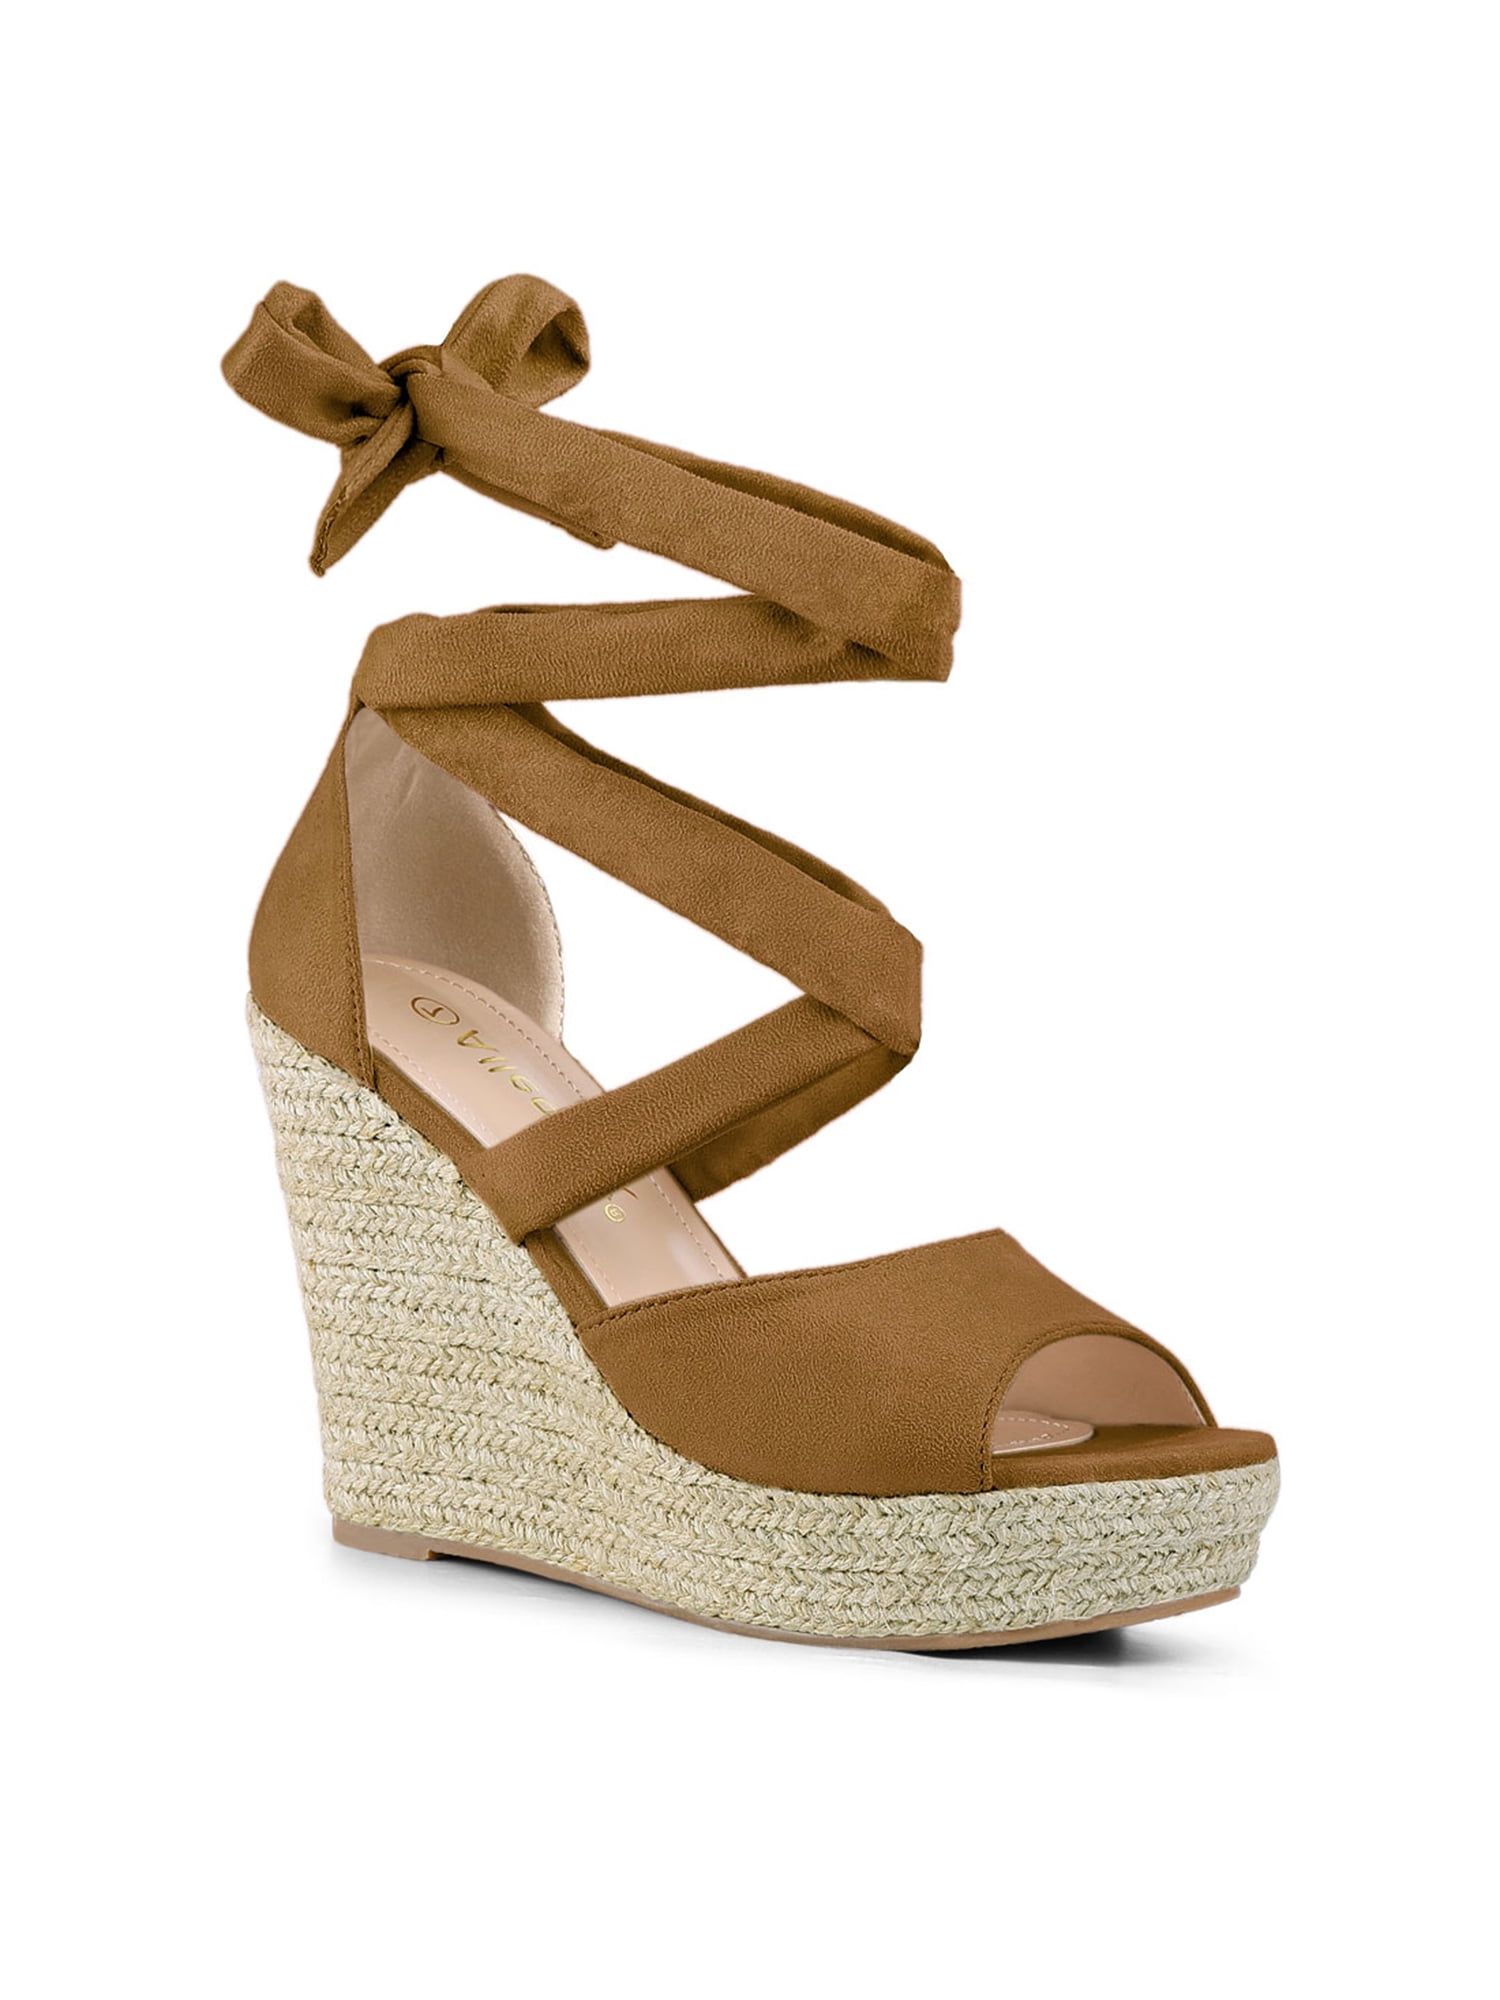 BLUE JEANS SABOT WEDGE - COD. 19928 - SHARLENE CALZATURE ® official site